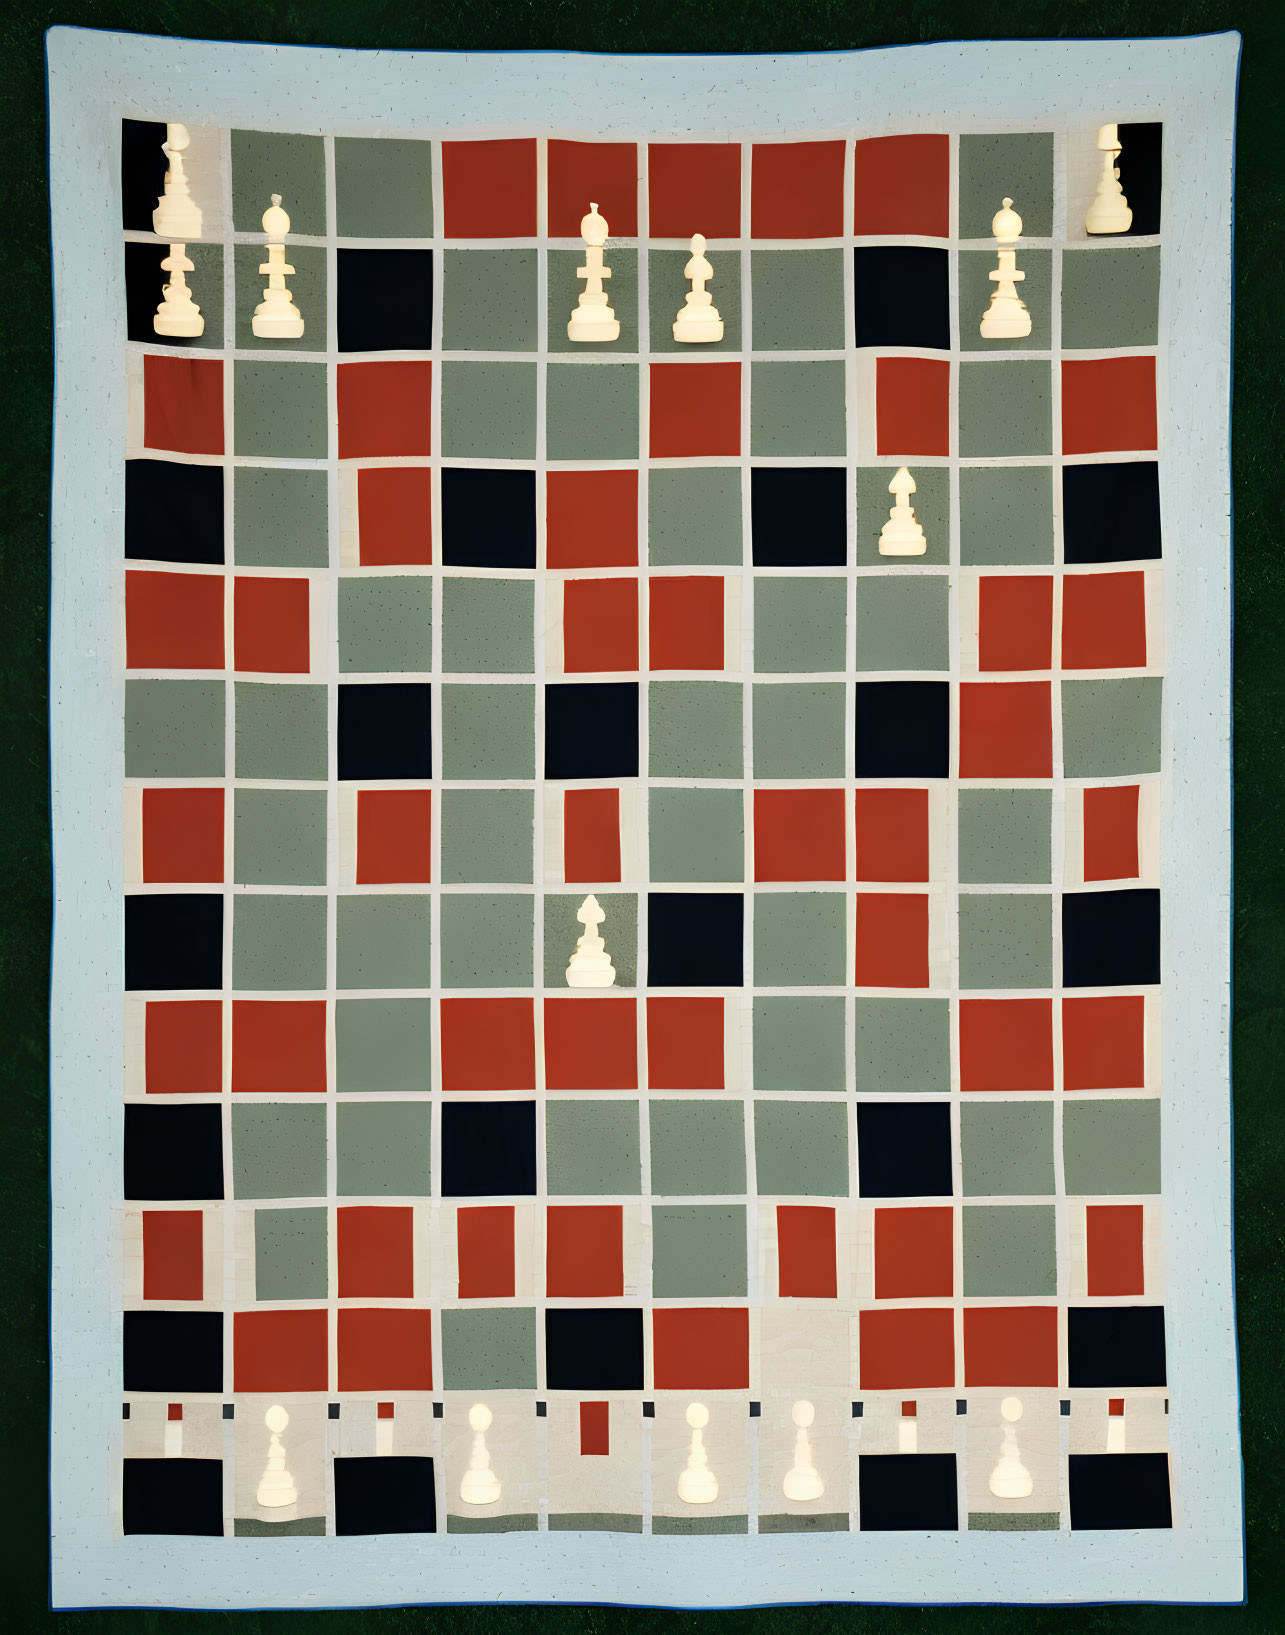 Chessboard on Green Grass with Aligned White Pieces